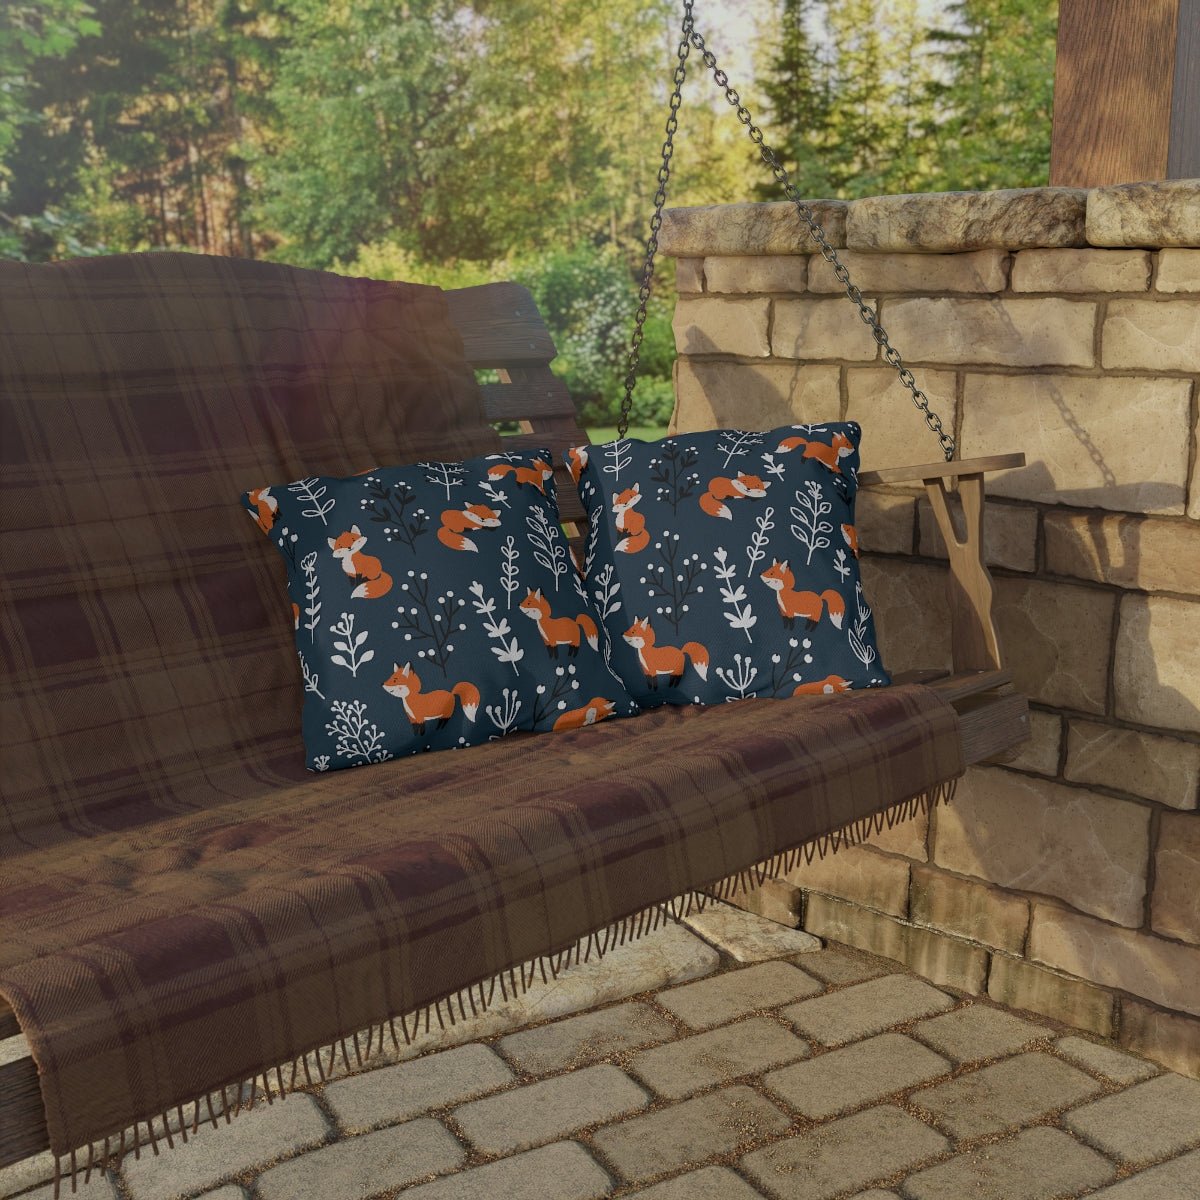 Happy Foxes Outdoor Pillow - Puffin Lime